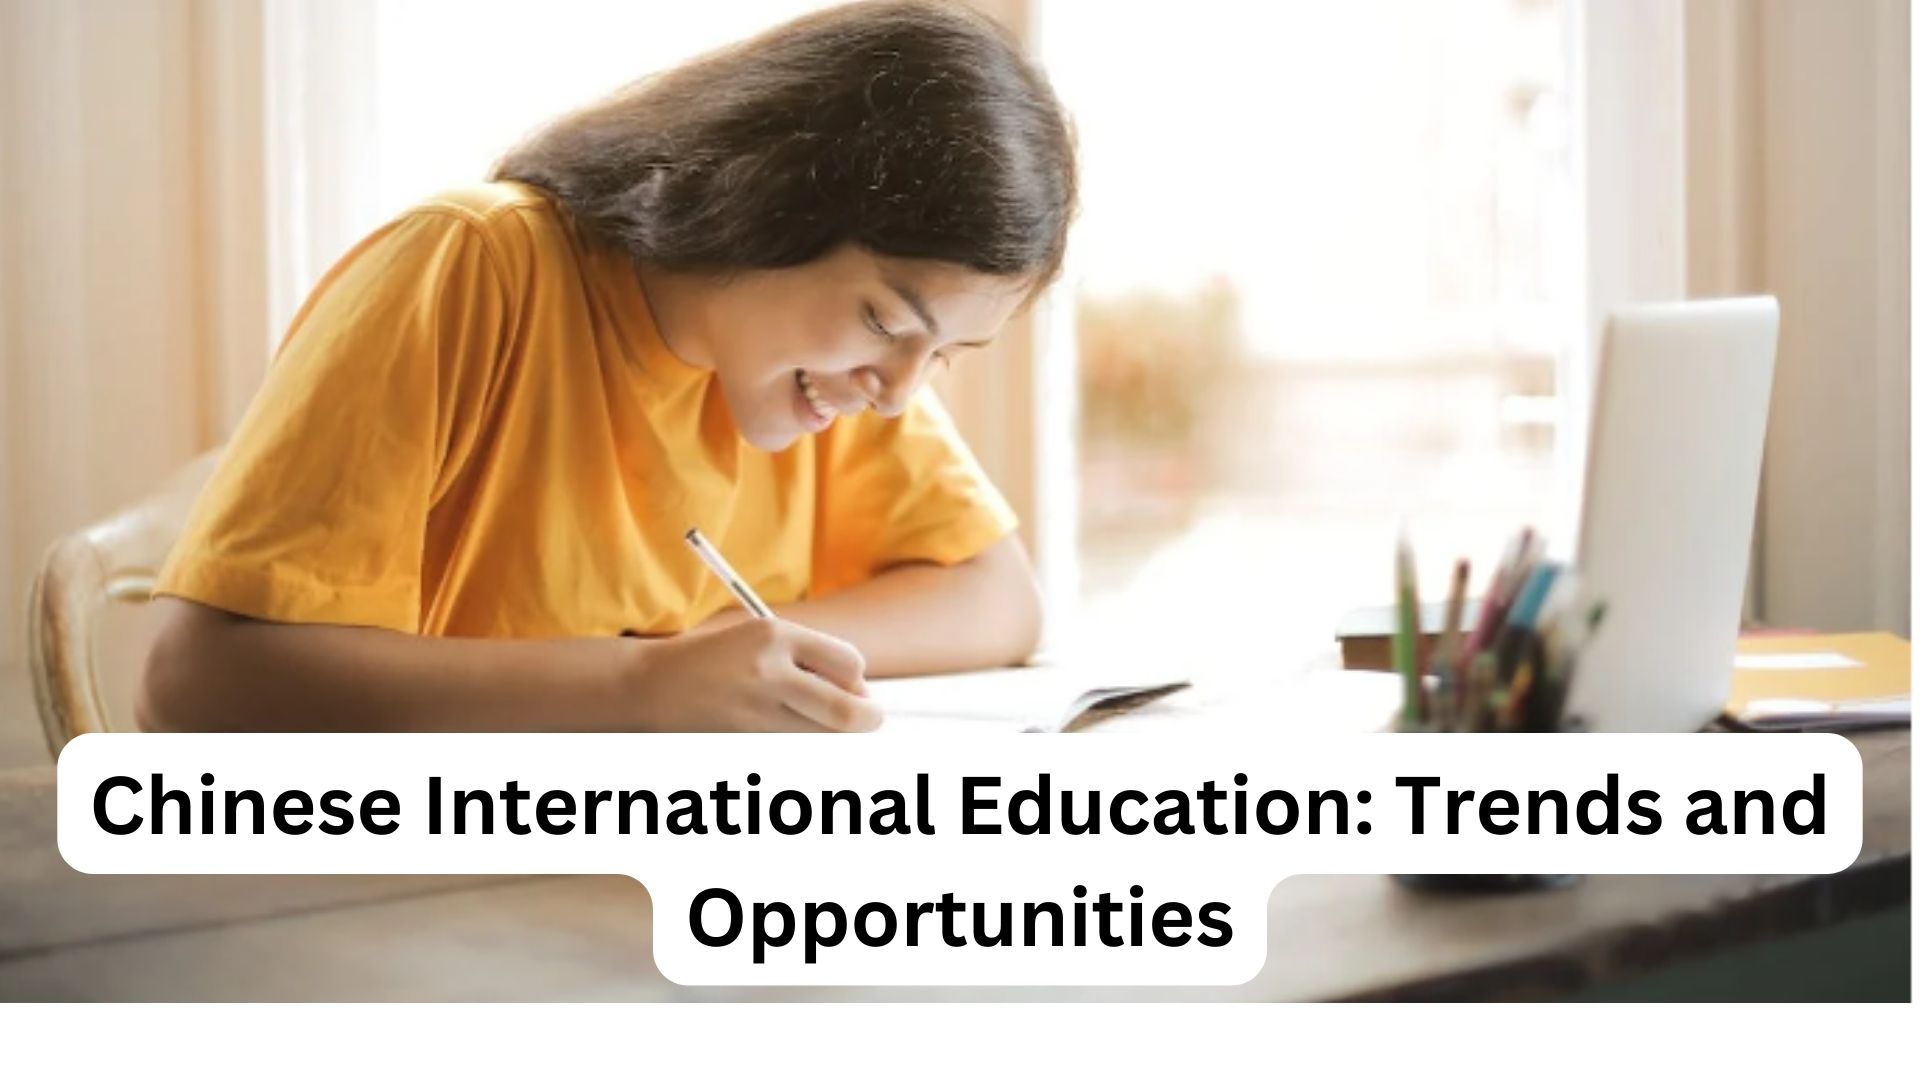 Chinese International Education: Trends and Opportunities